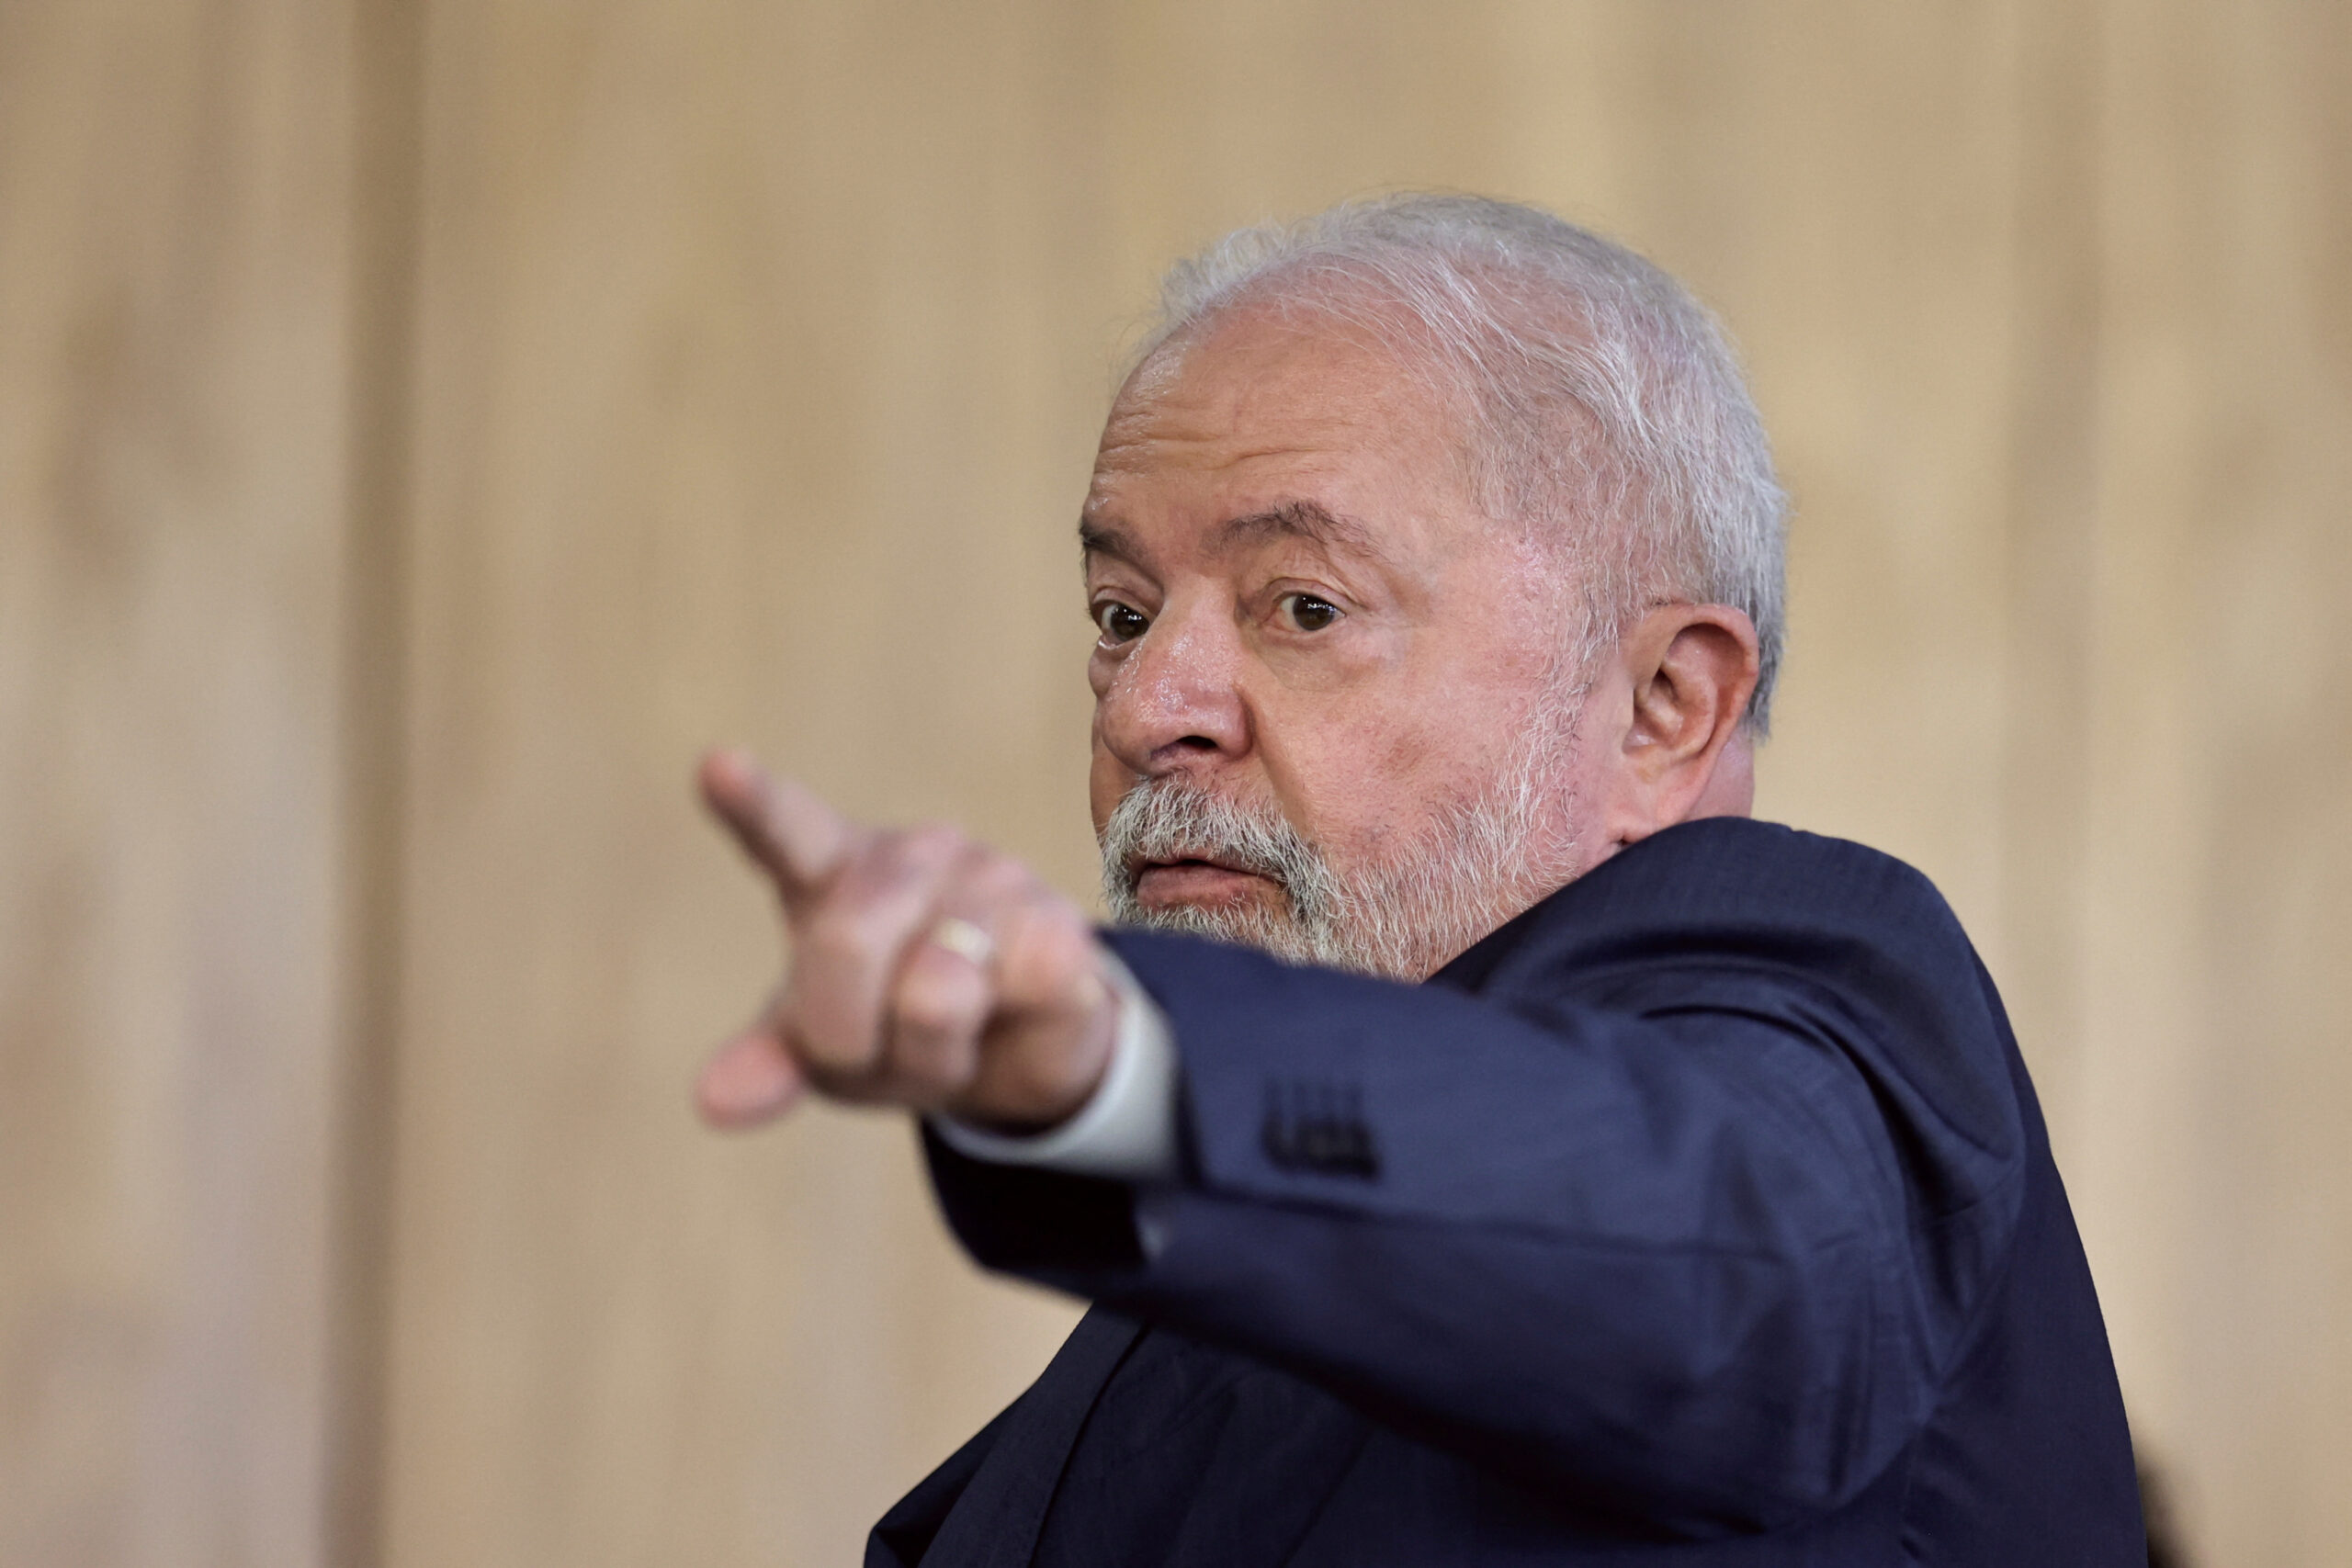 Lula says he prays Argentina elects president who defends social inclusion